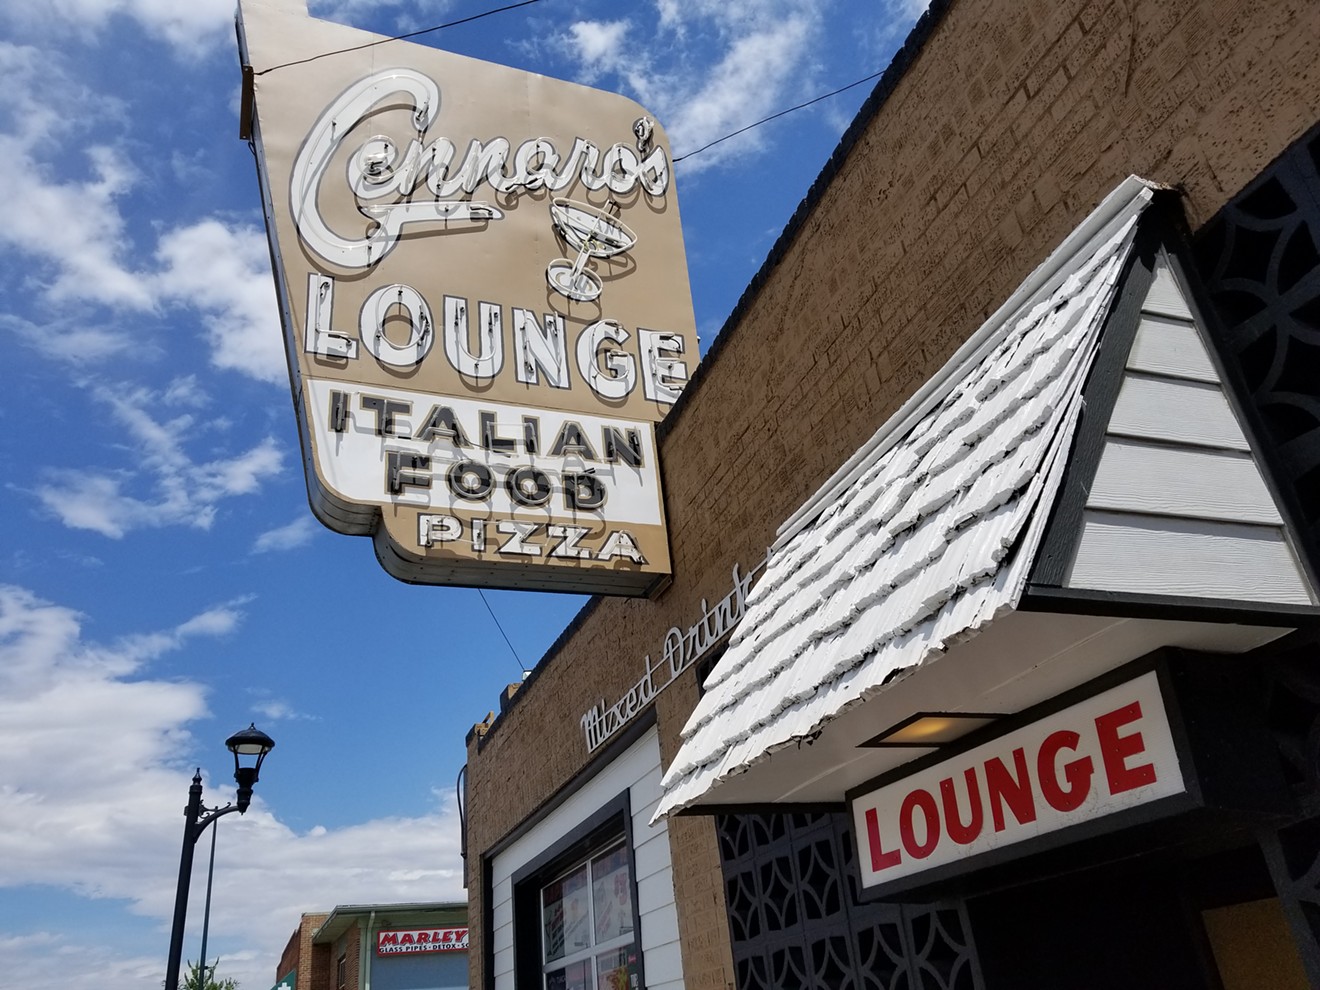 Gennaro's has a lounge side and a restaurant side, but most neighborhood regulars hang out in the lounge.